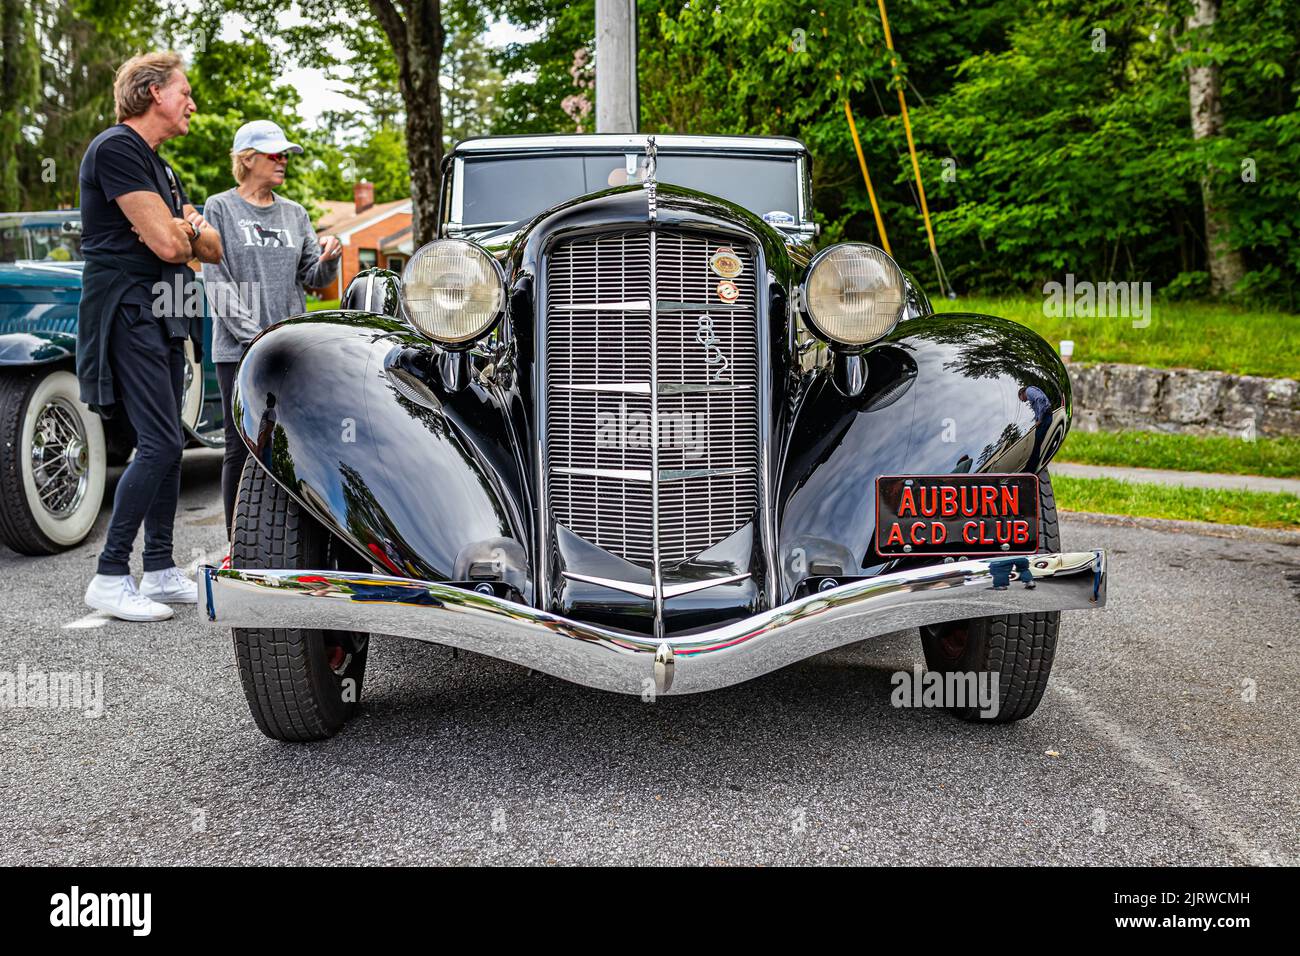 Highlands, NC - June 11, 2022: Low perspective front view of a 1936 Auburn 852 Cabriolet at a local car show. Stock Photo